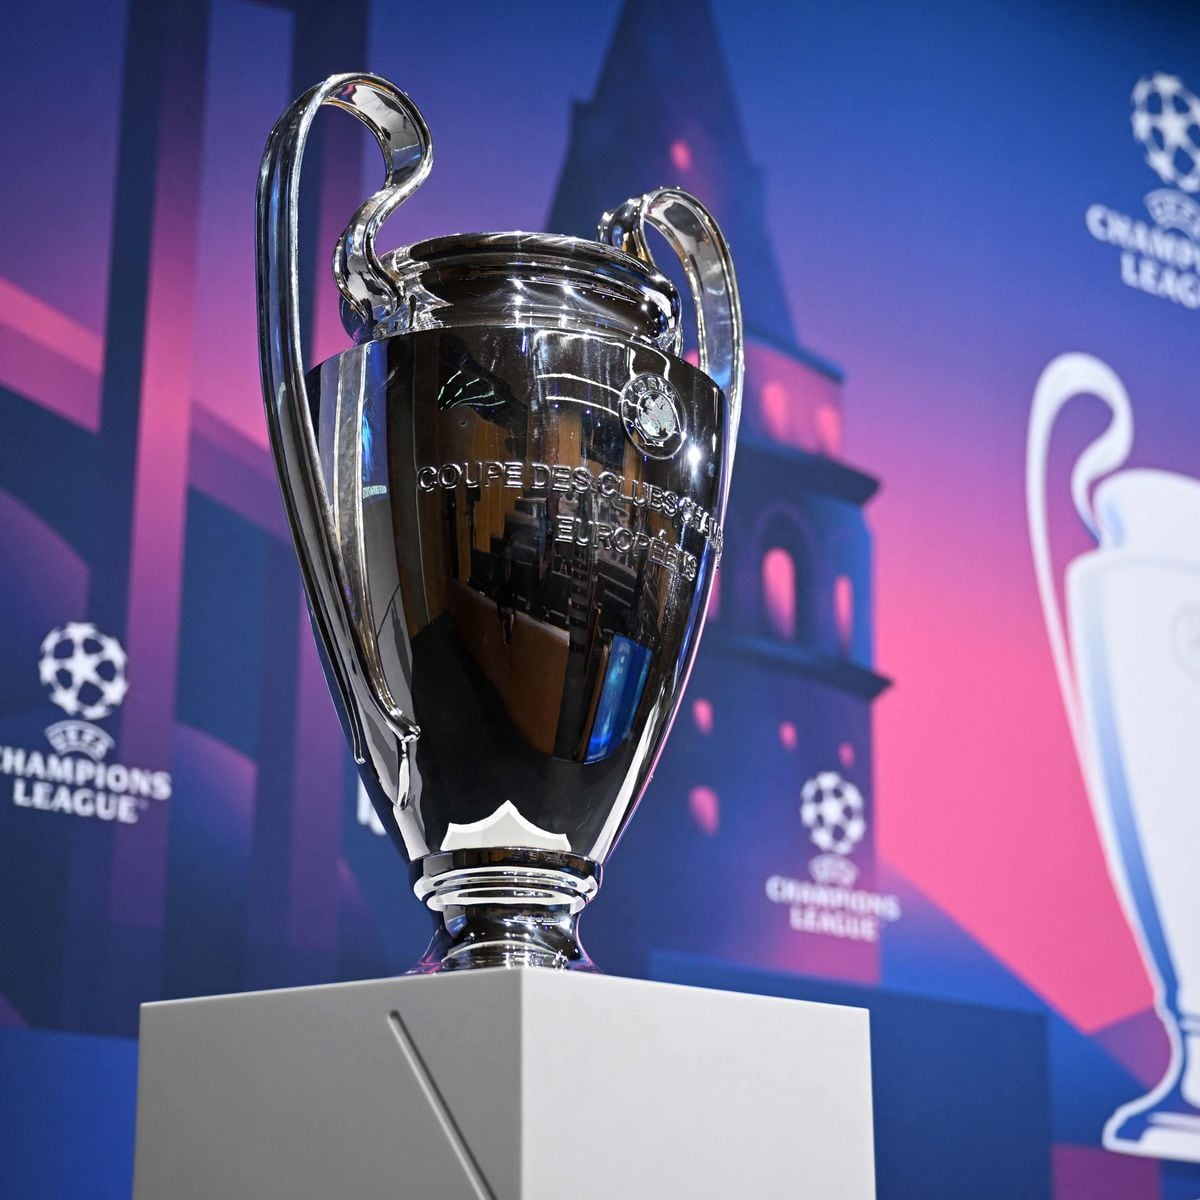 Champions League draw: Head-to-head records of Premier League